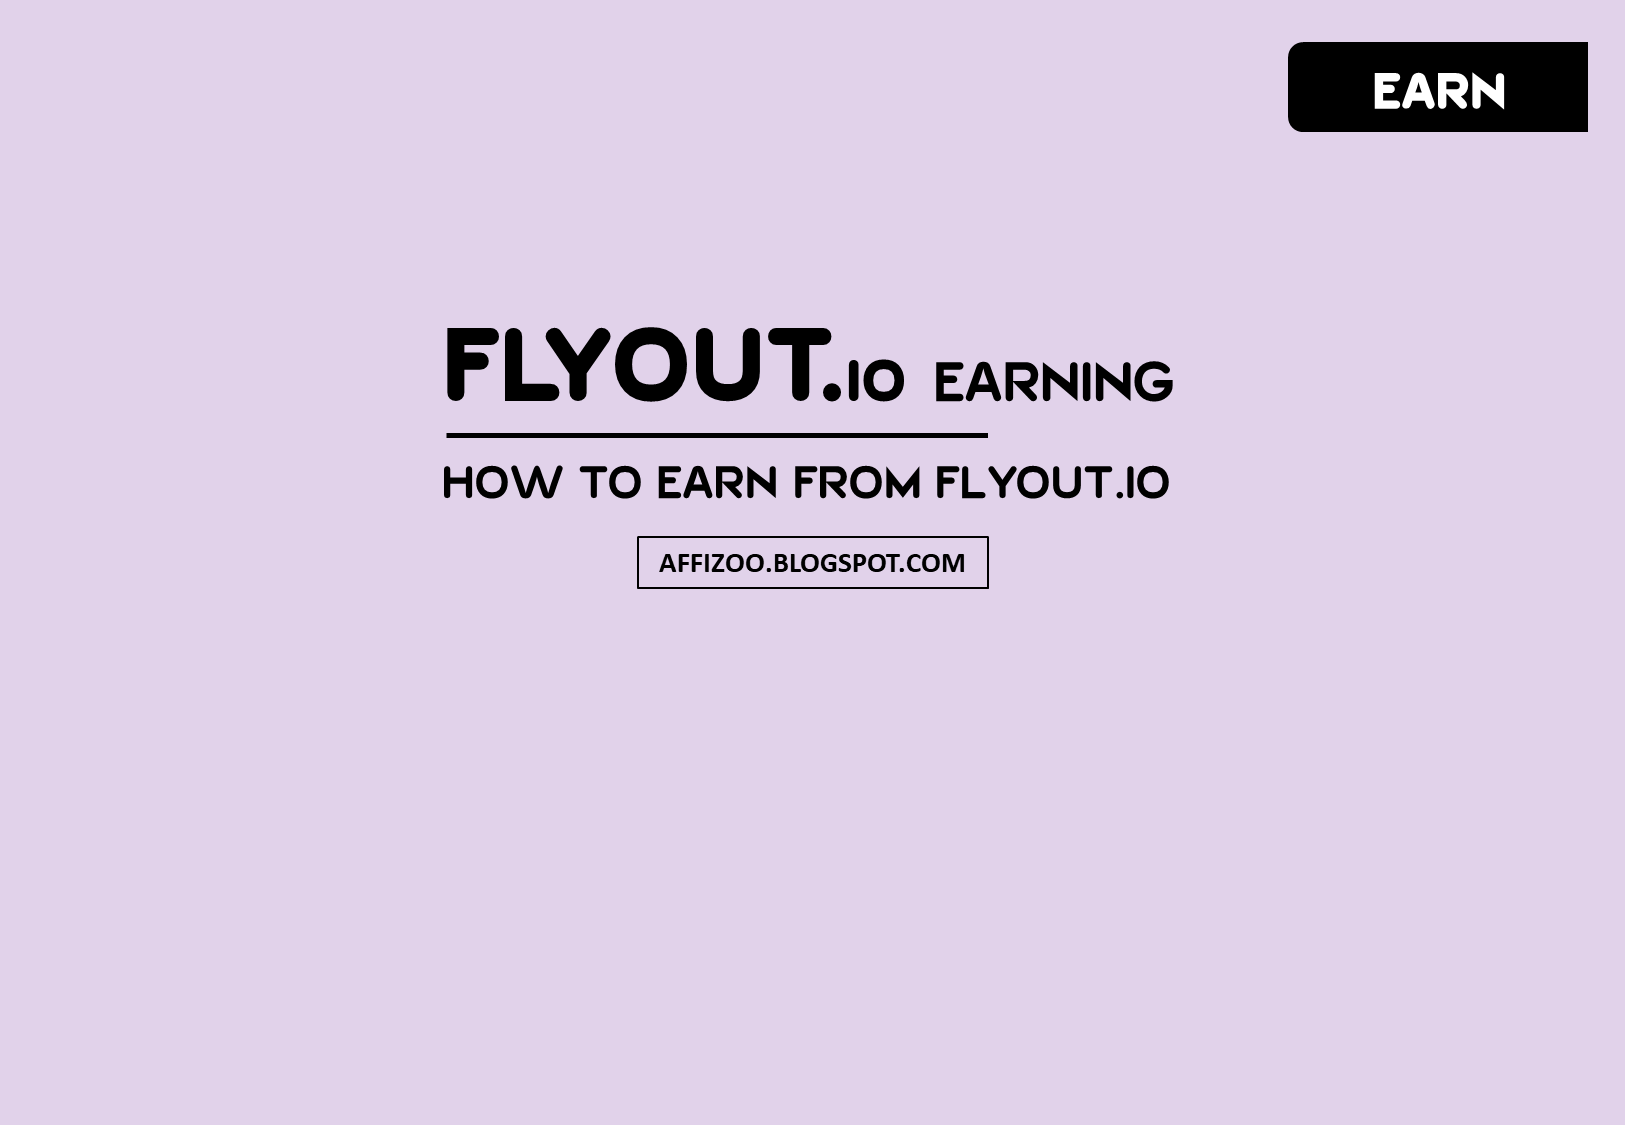 How To Earn/Make Money Online From Your Blog With Flyout.io